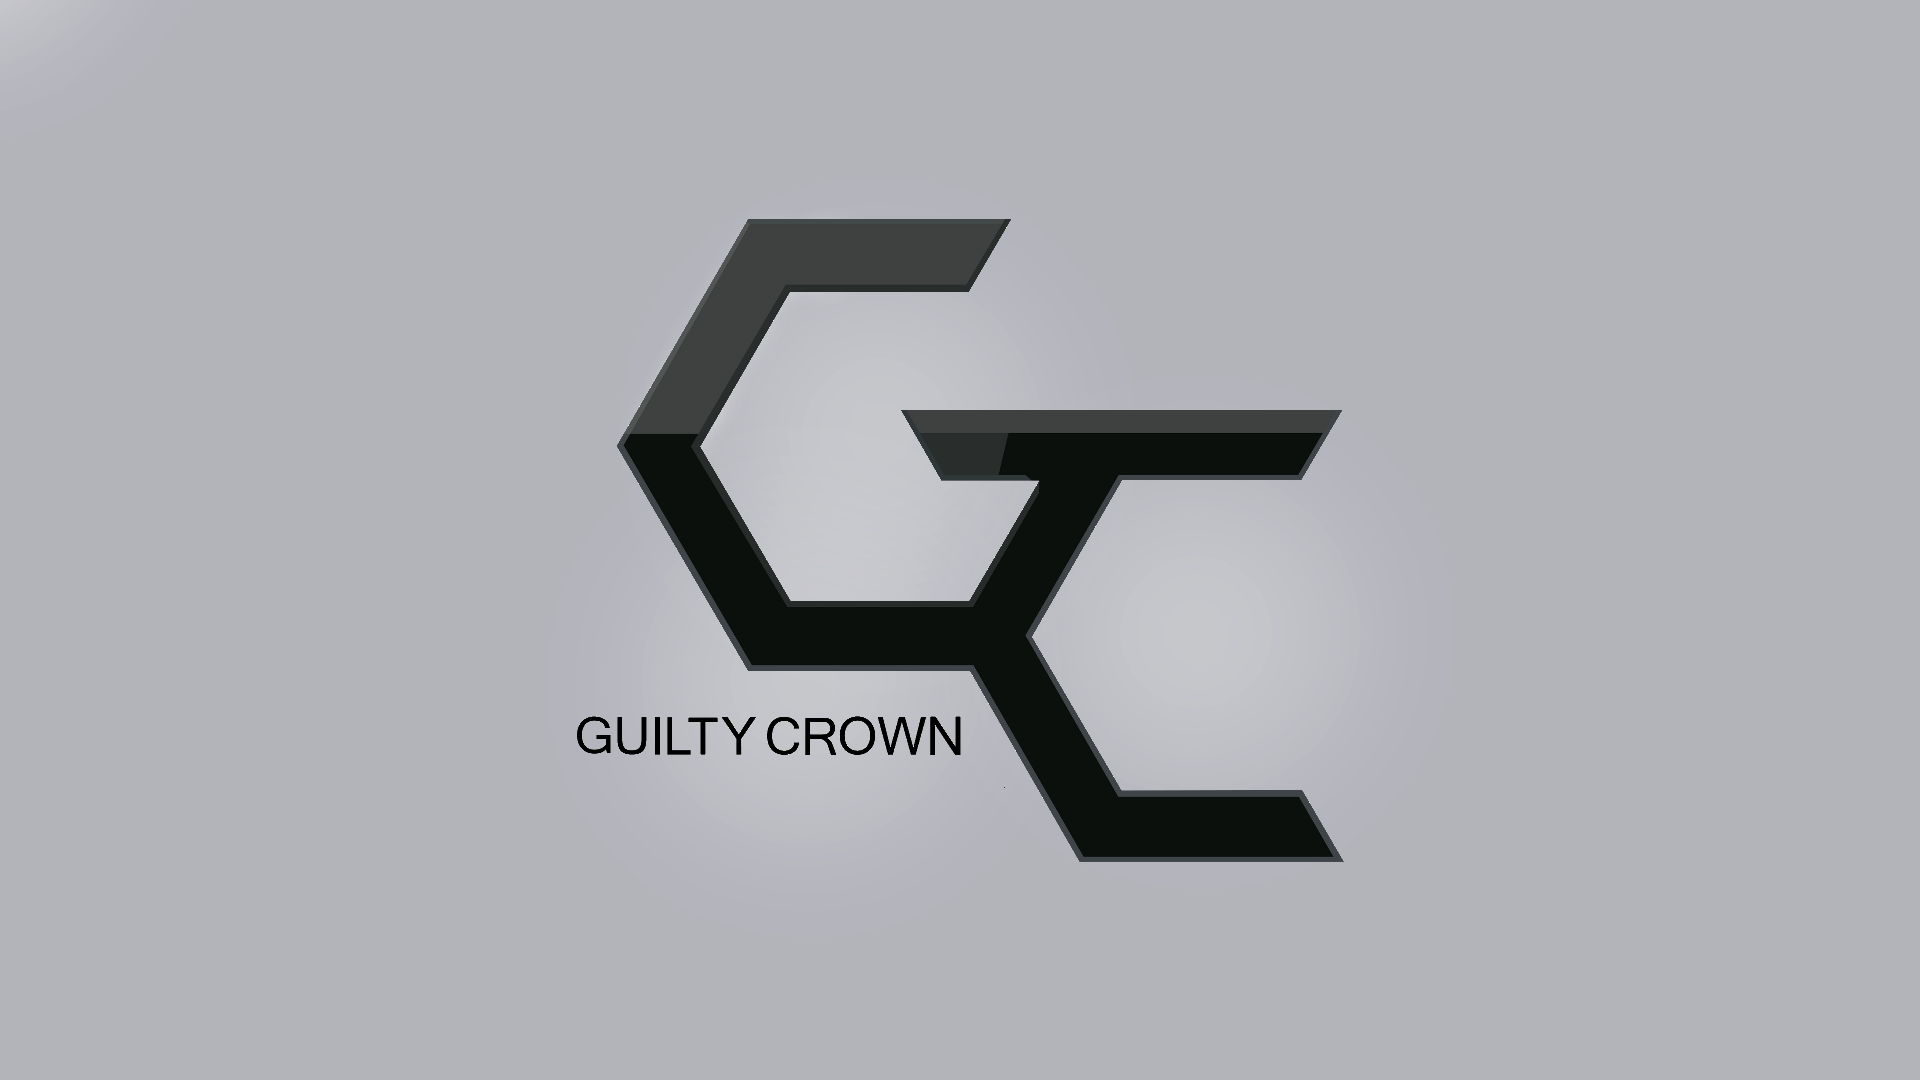 Anime 1920x1080 Guilty Crown typography minimalism simple background